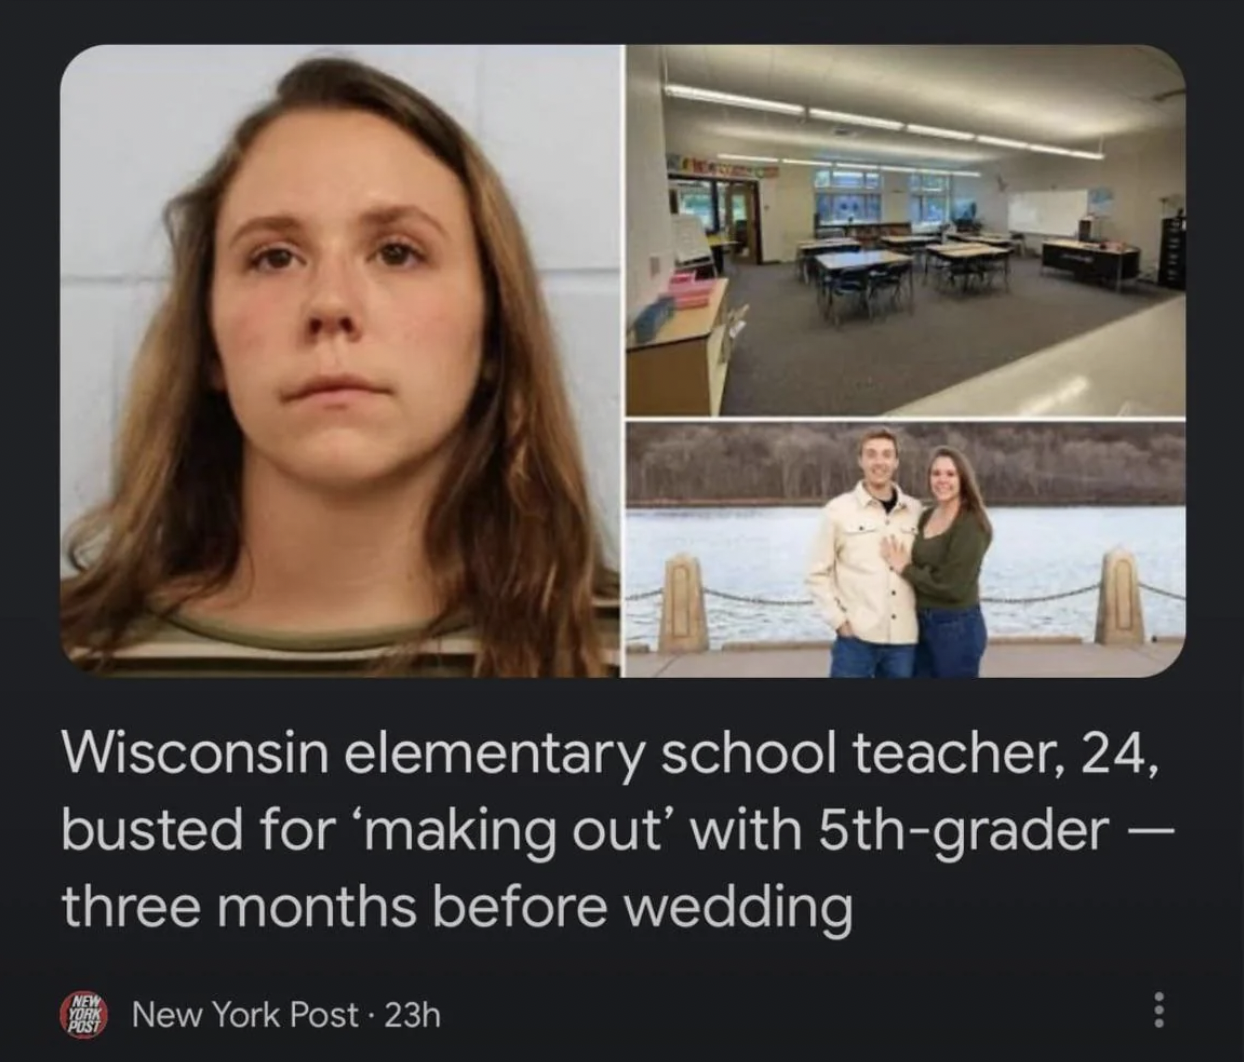 madison bergmann - Wisconsin elementary school teacher, 24, busted for 'making out' with 5thgrader three months before wedding New York Post 23h